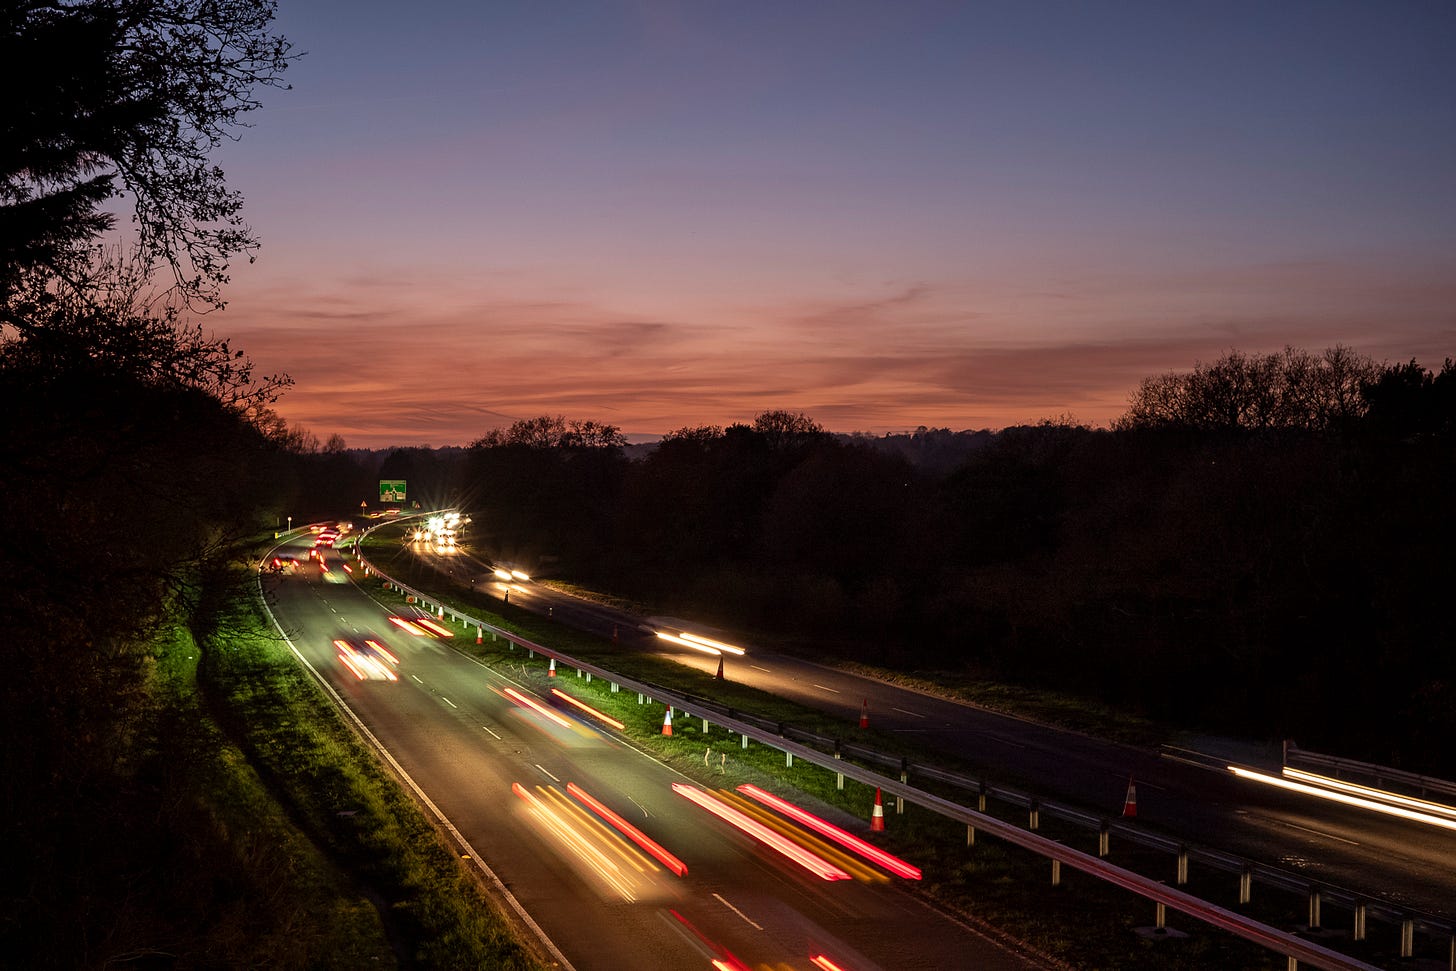 A road at dusk with long, blurred red tail lights and white headlights of cars